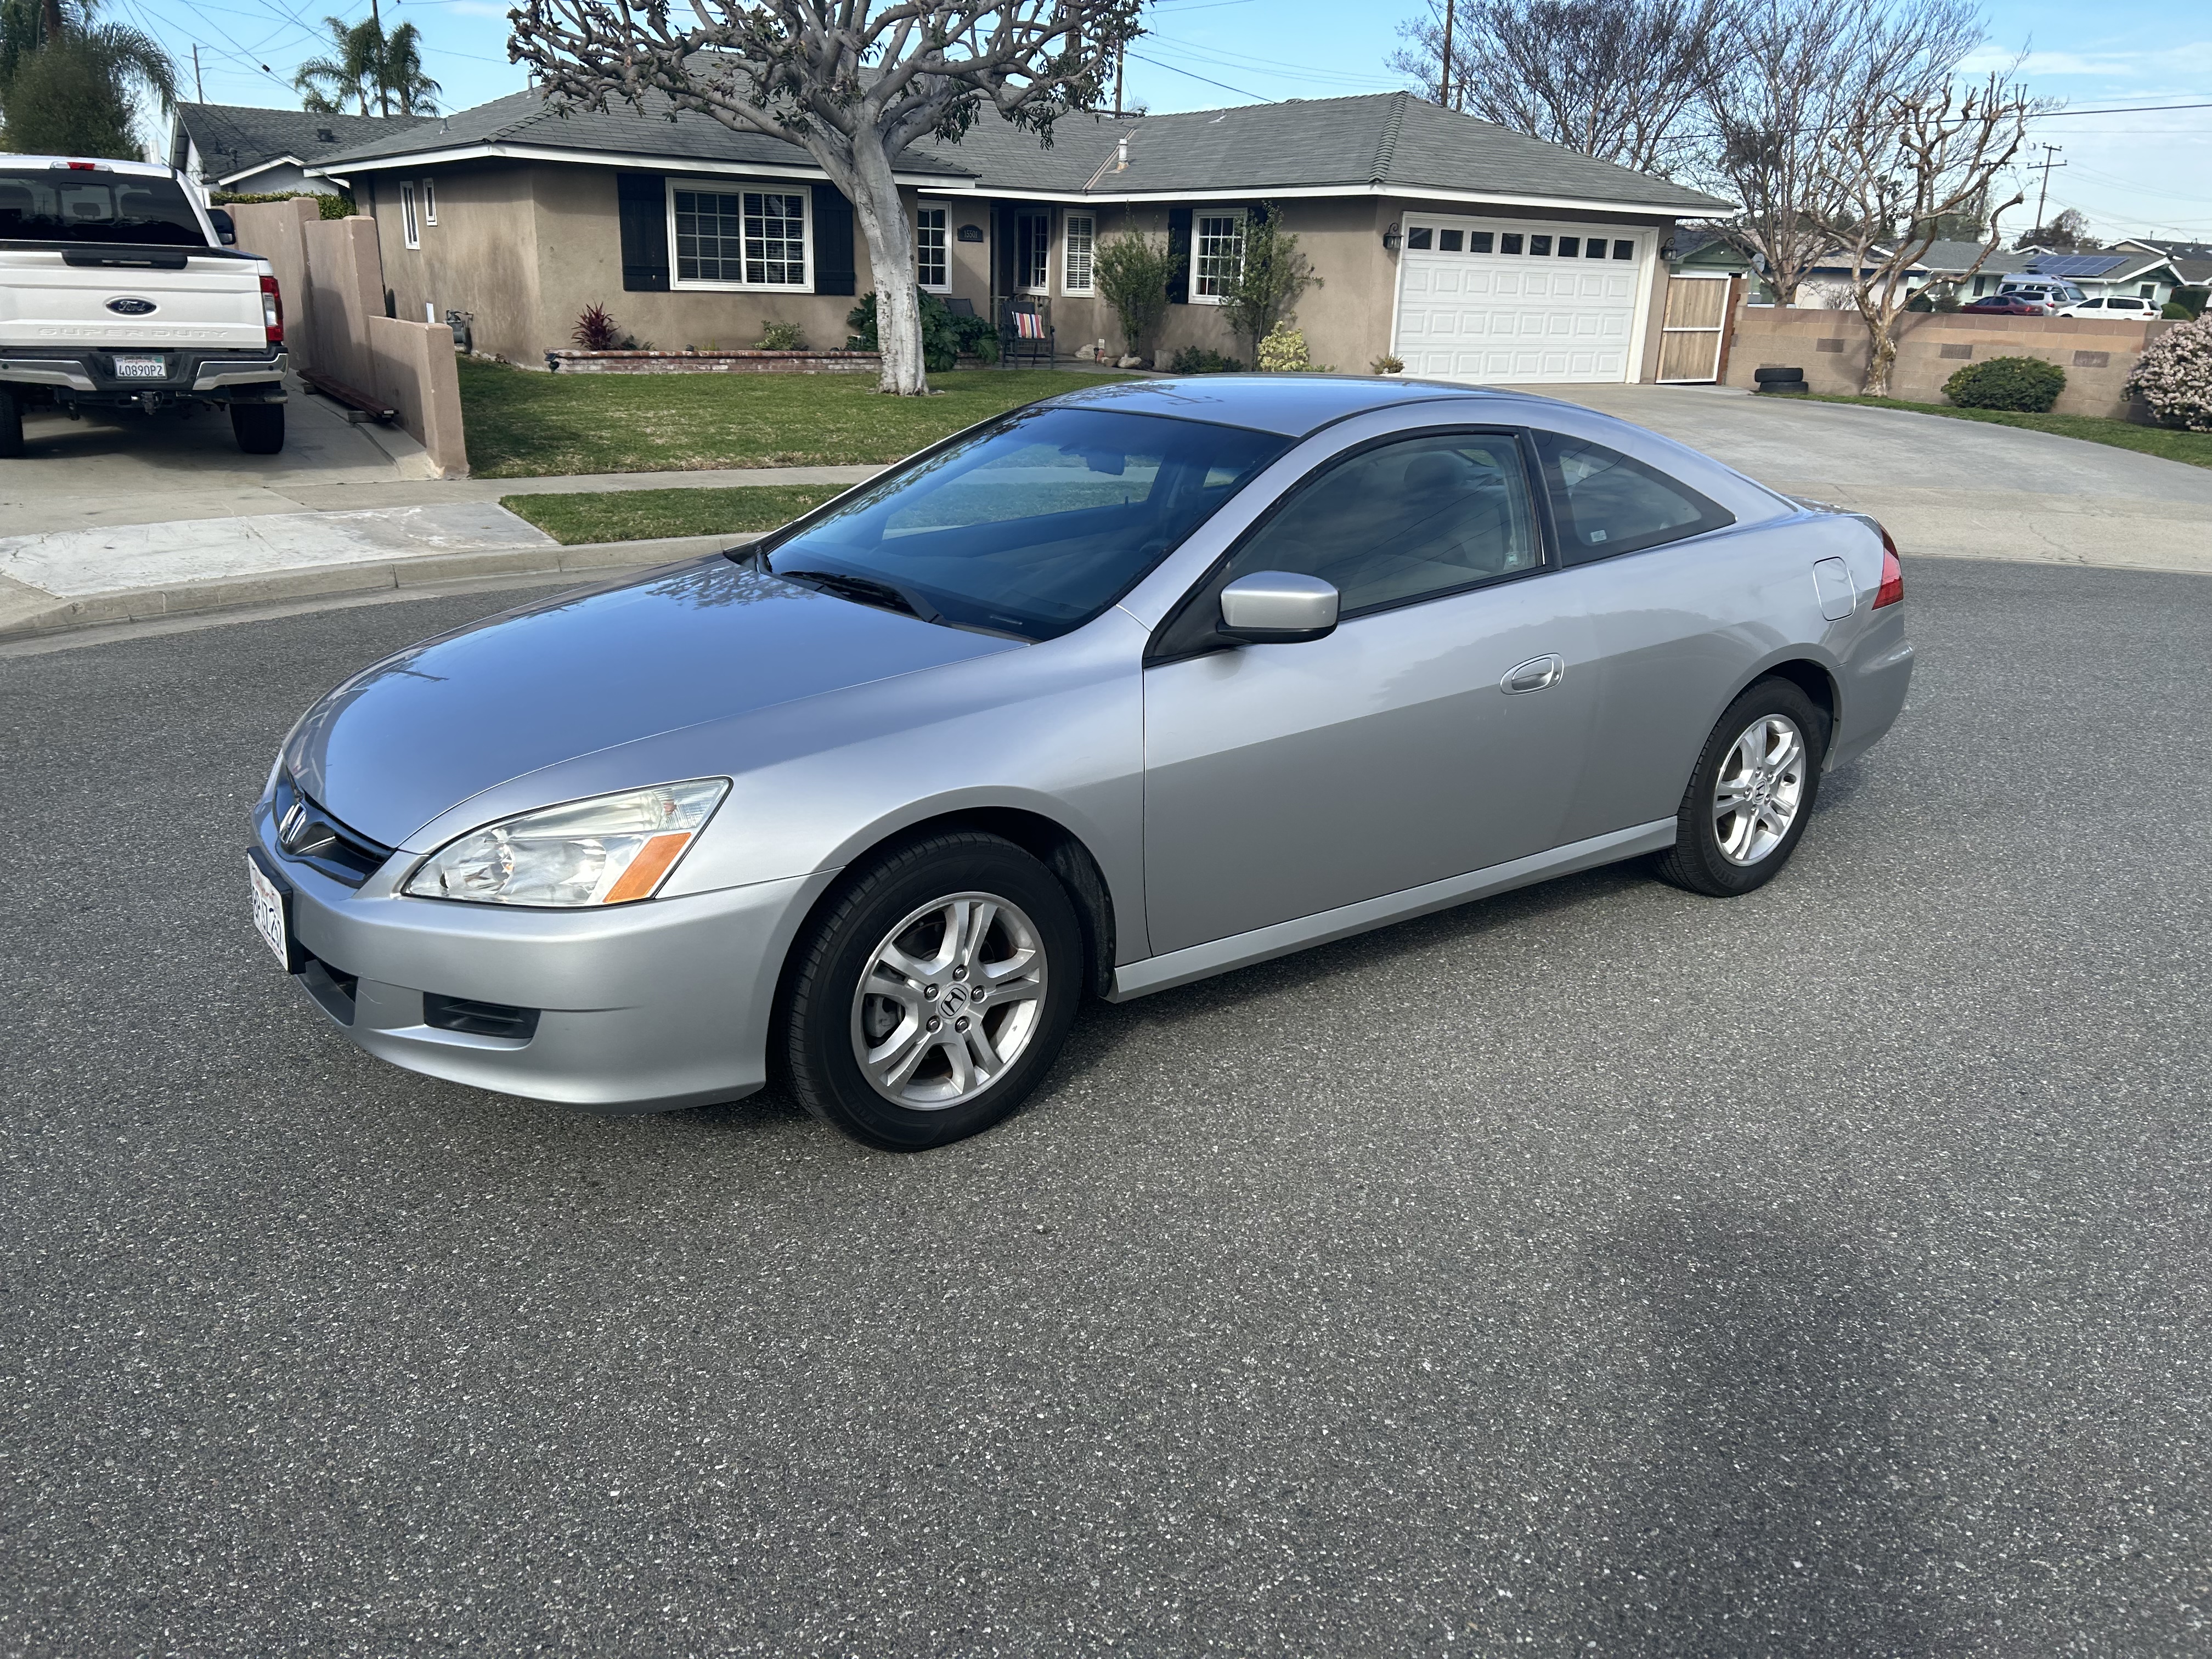 Used 2007 Honda Accord for Sale Near Me in Walnut, CA - Autotrader